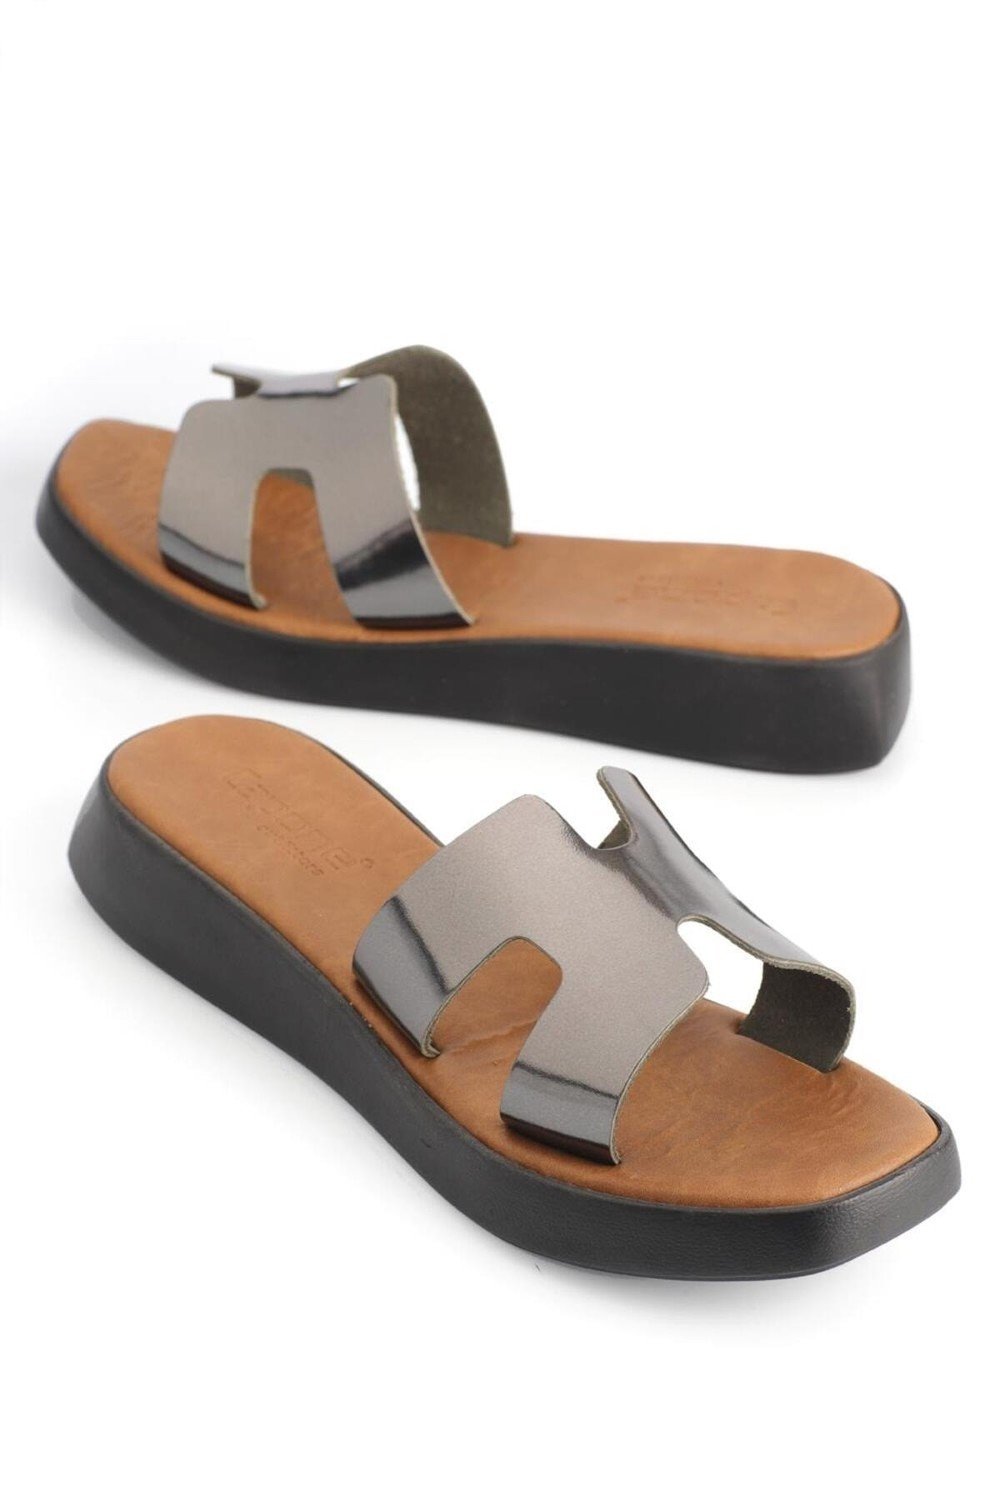 Capone Outfitters Mules - Gray - Wedge